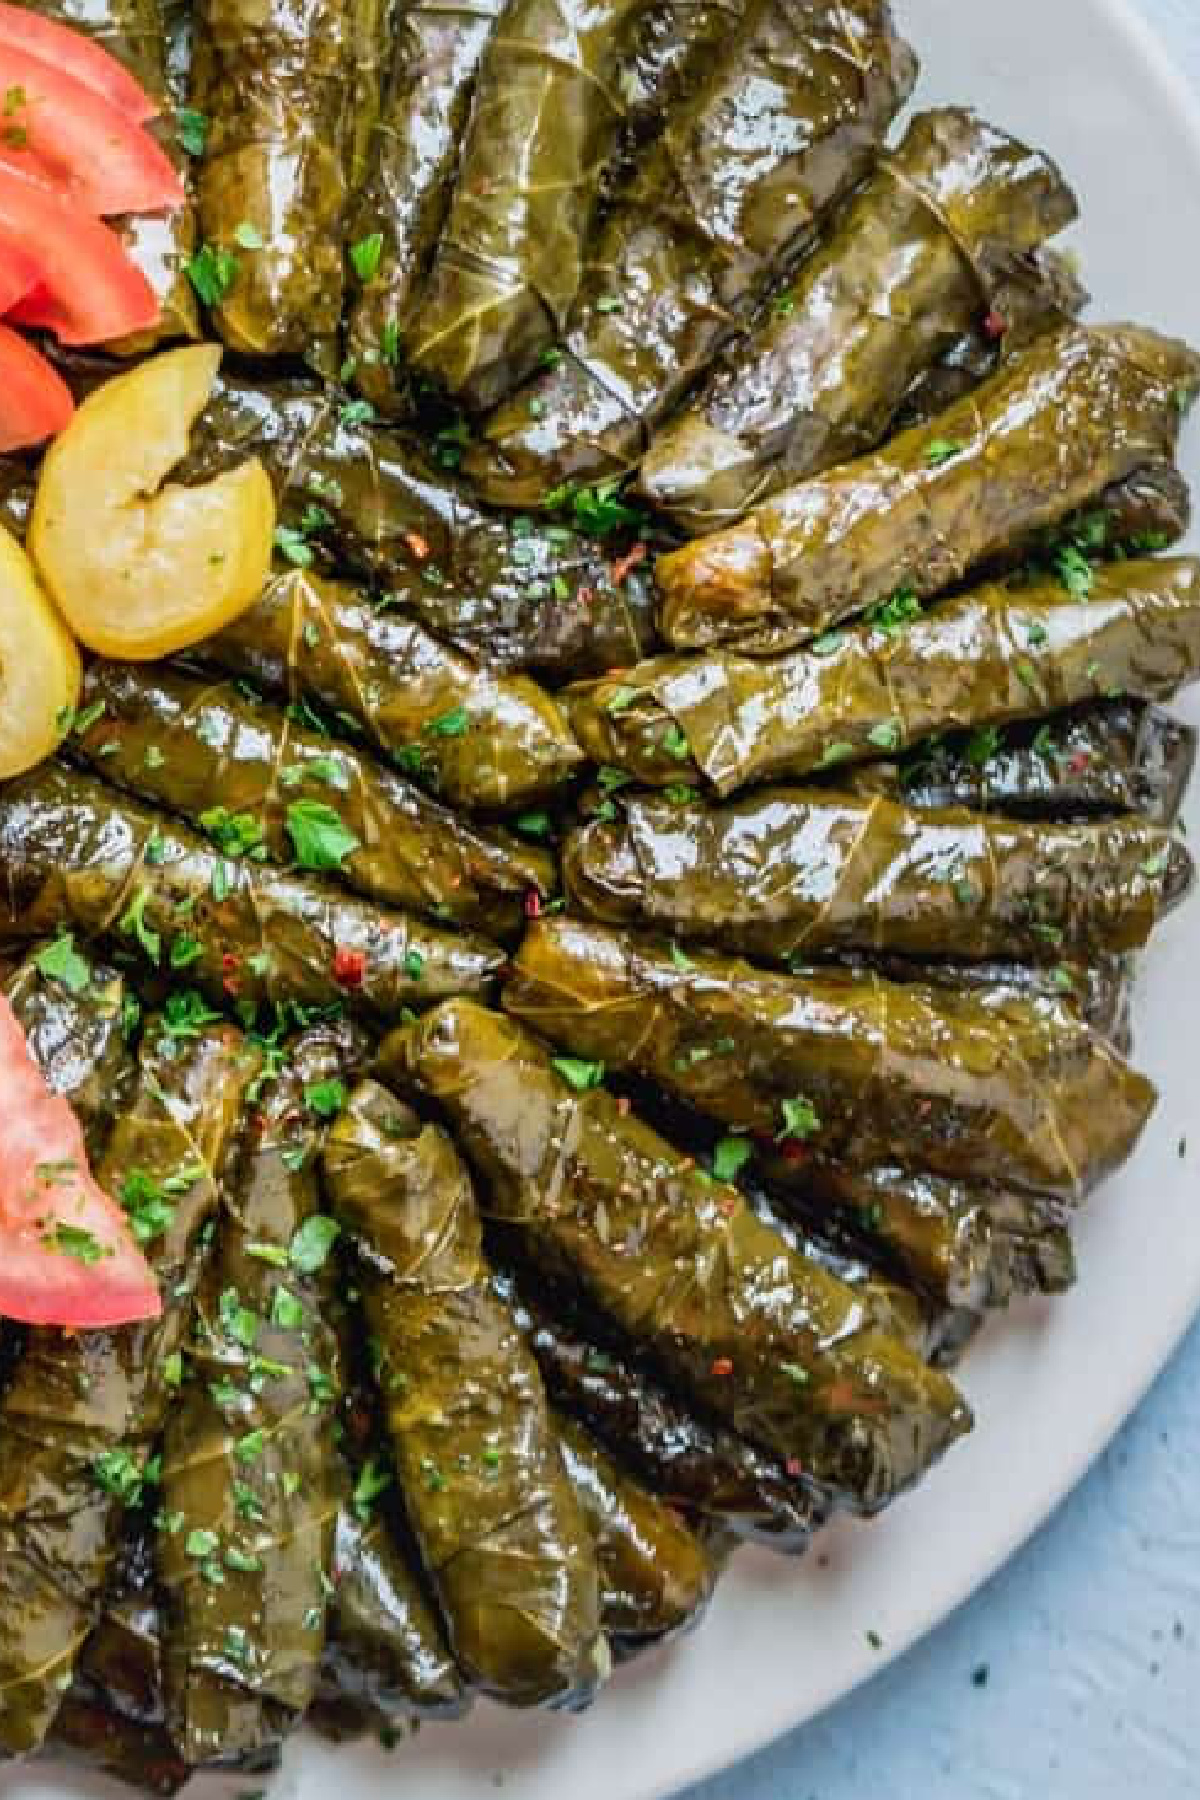 Cheap Party Food Ideas - Vegetable and Rice Stuffed Grape Leaves